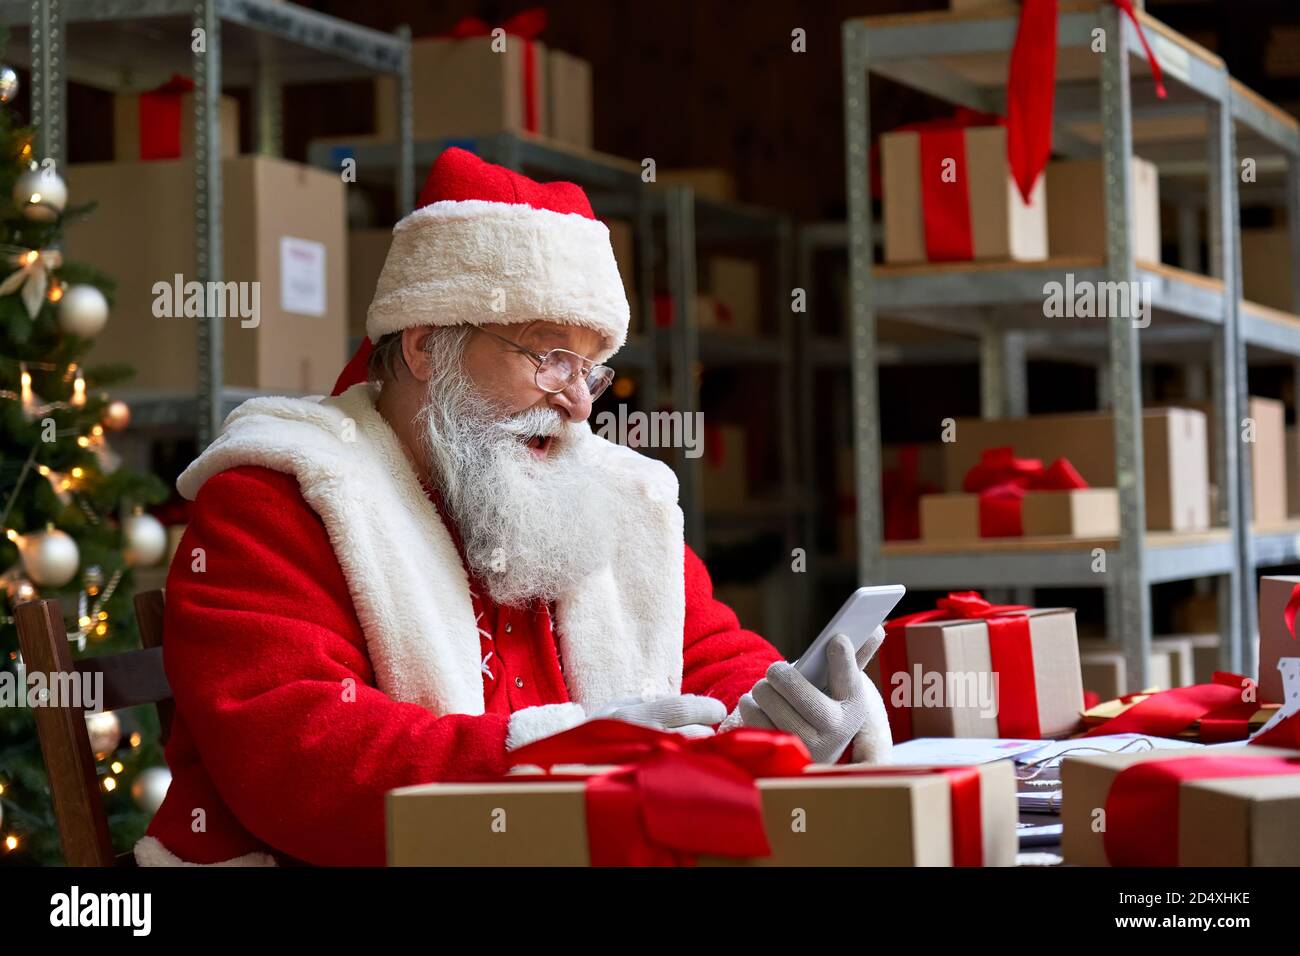 Happy Santa Claus holding cell phone using mobile app sitting at workshop table. Stock Photo